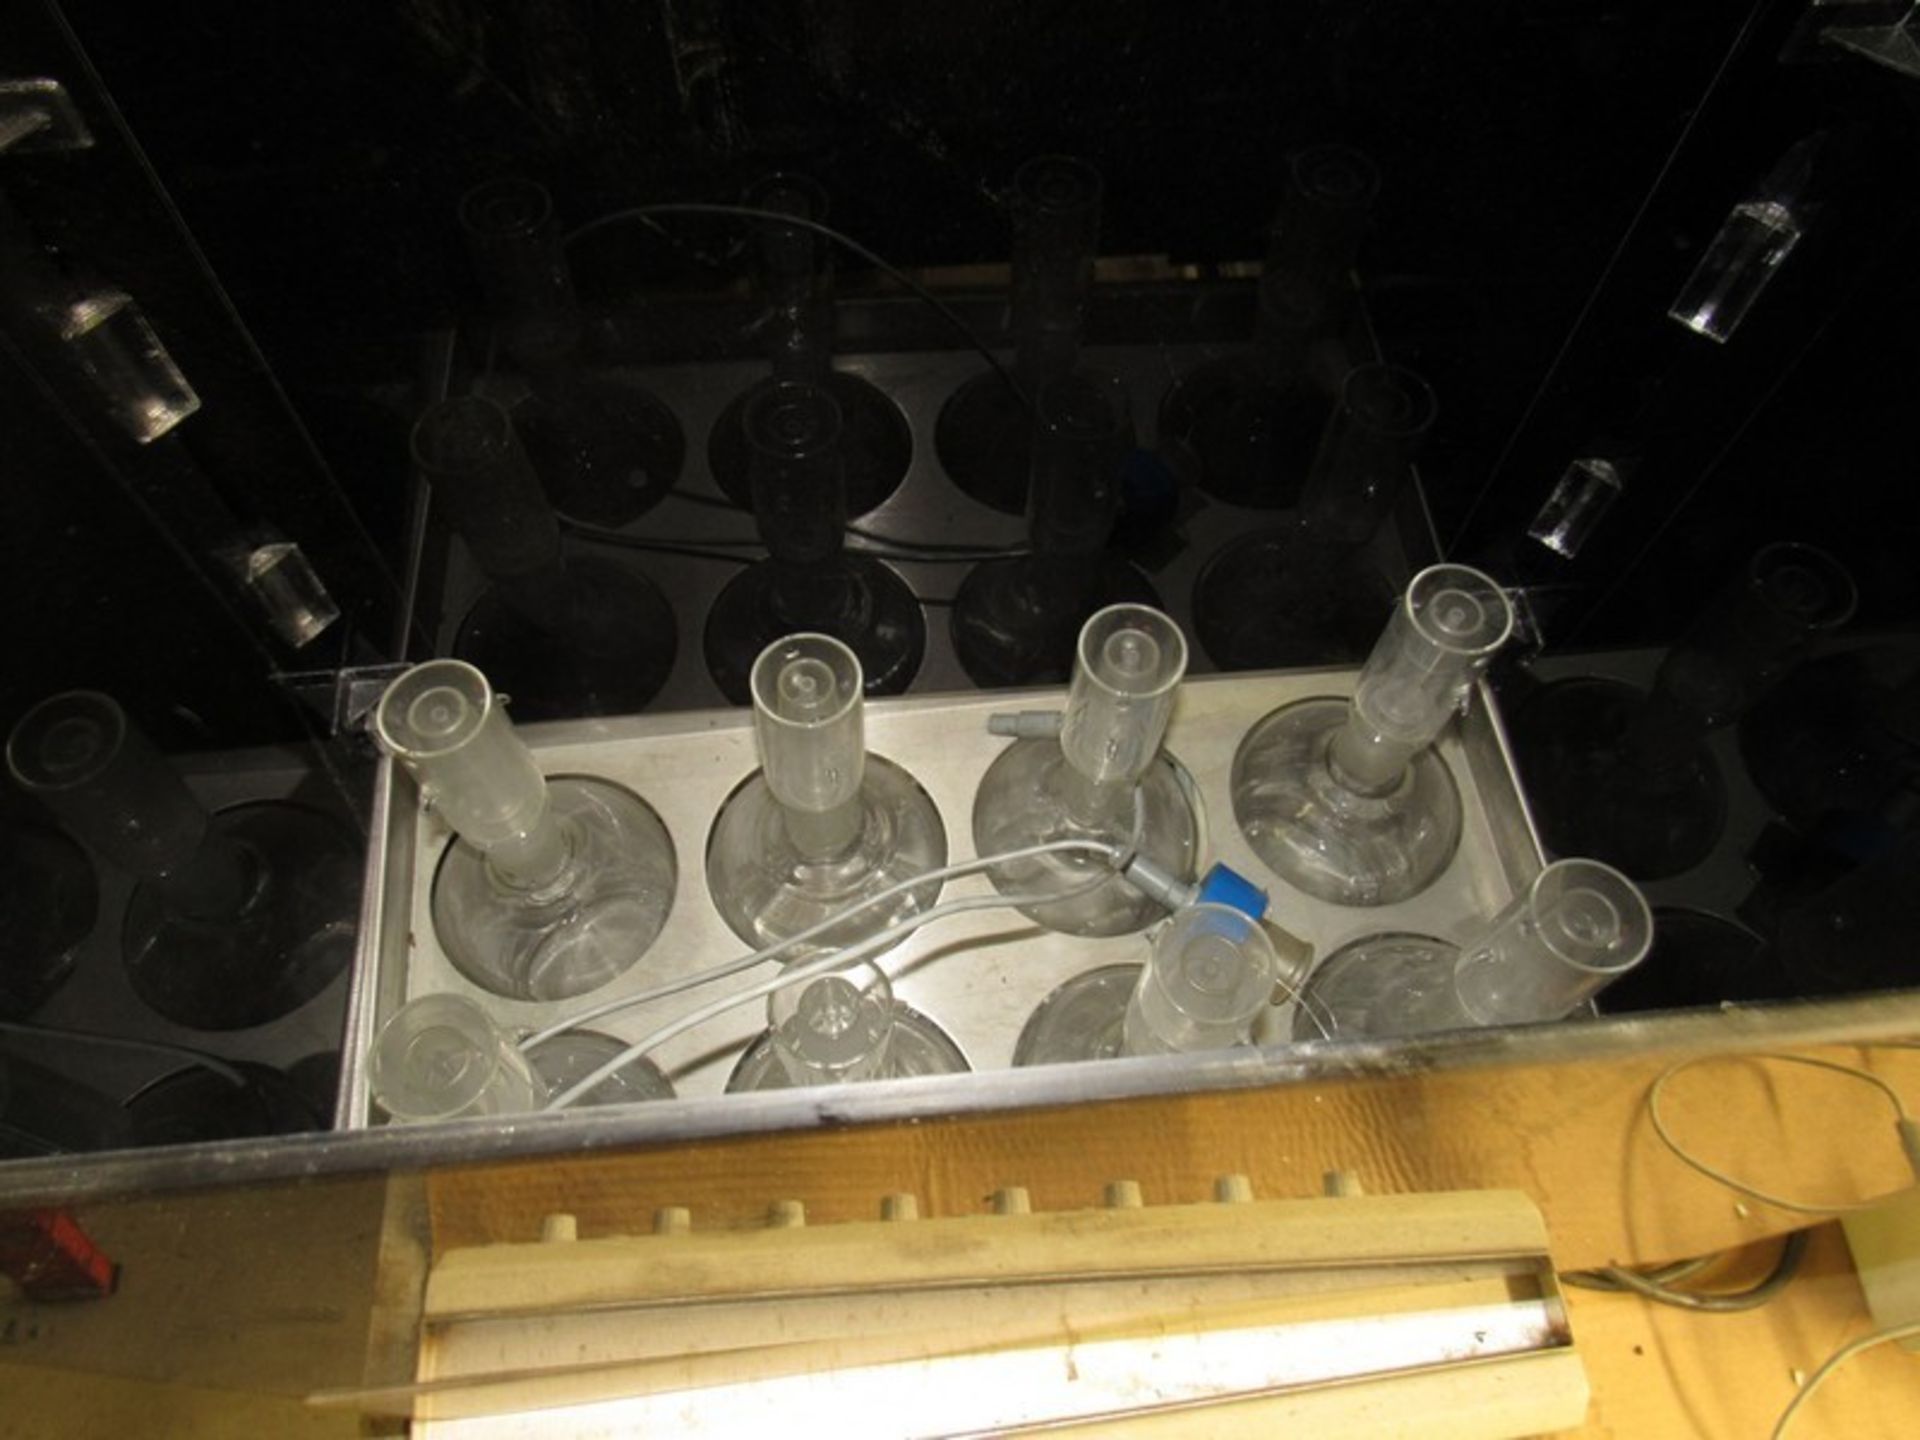 Electrolytic Respirometer Biodegradability Testing Machine with 16 Channel, computer and manuals. ( - Image 10 of 10